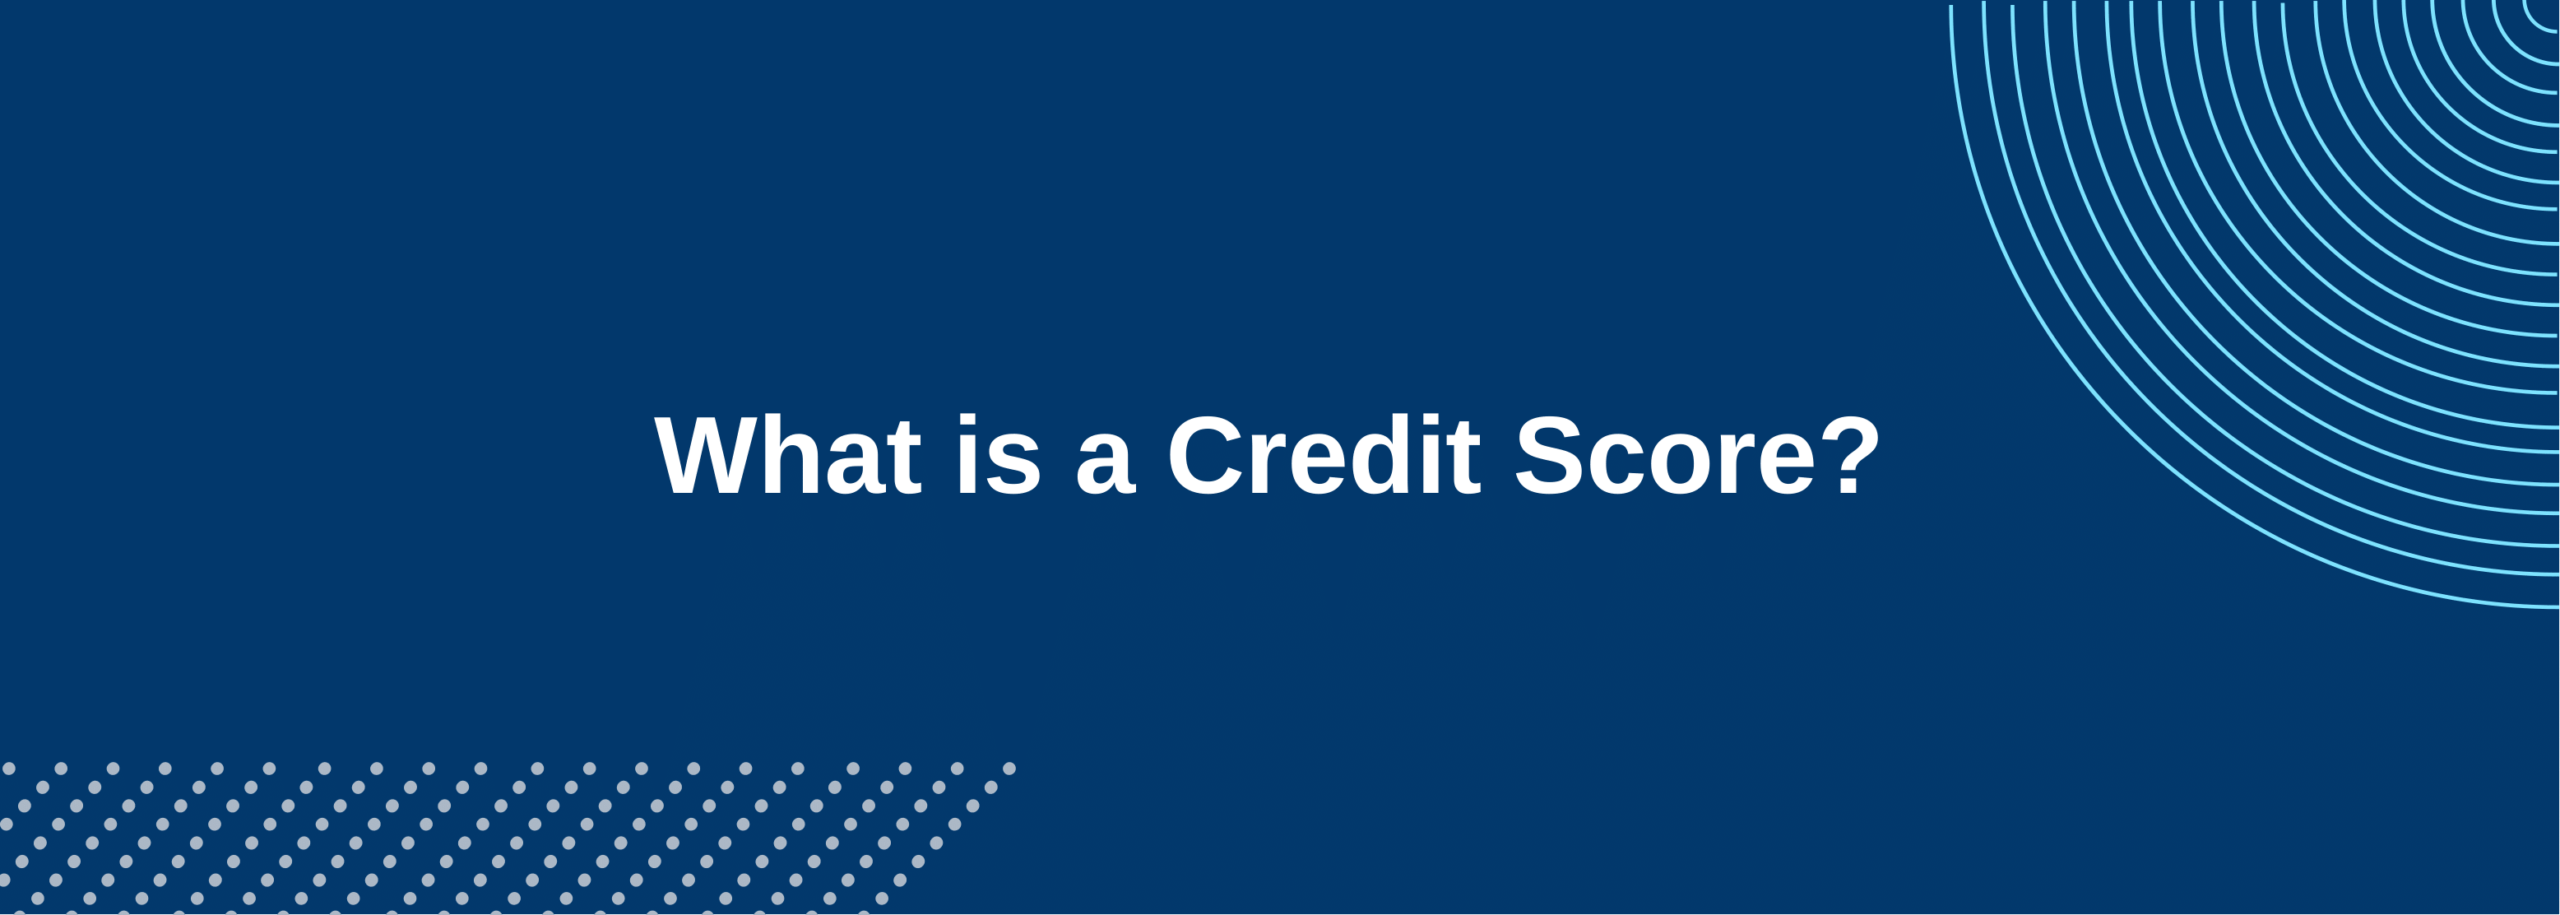 A credit score is a three-digit number between 300 and 850 that communicates a consumer’s creditworthiness based on their credit history.